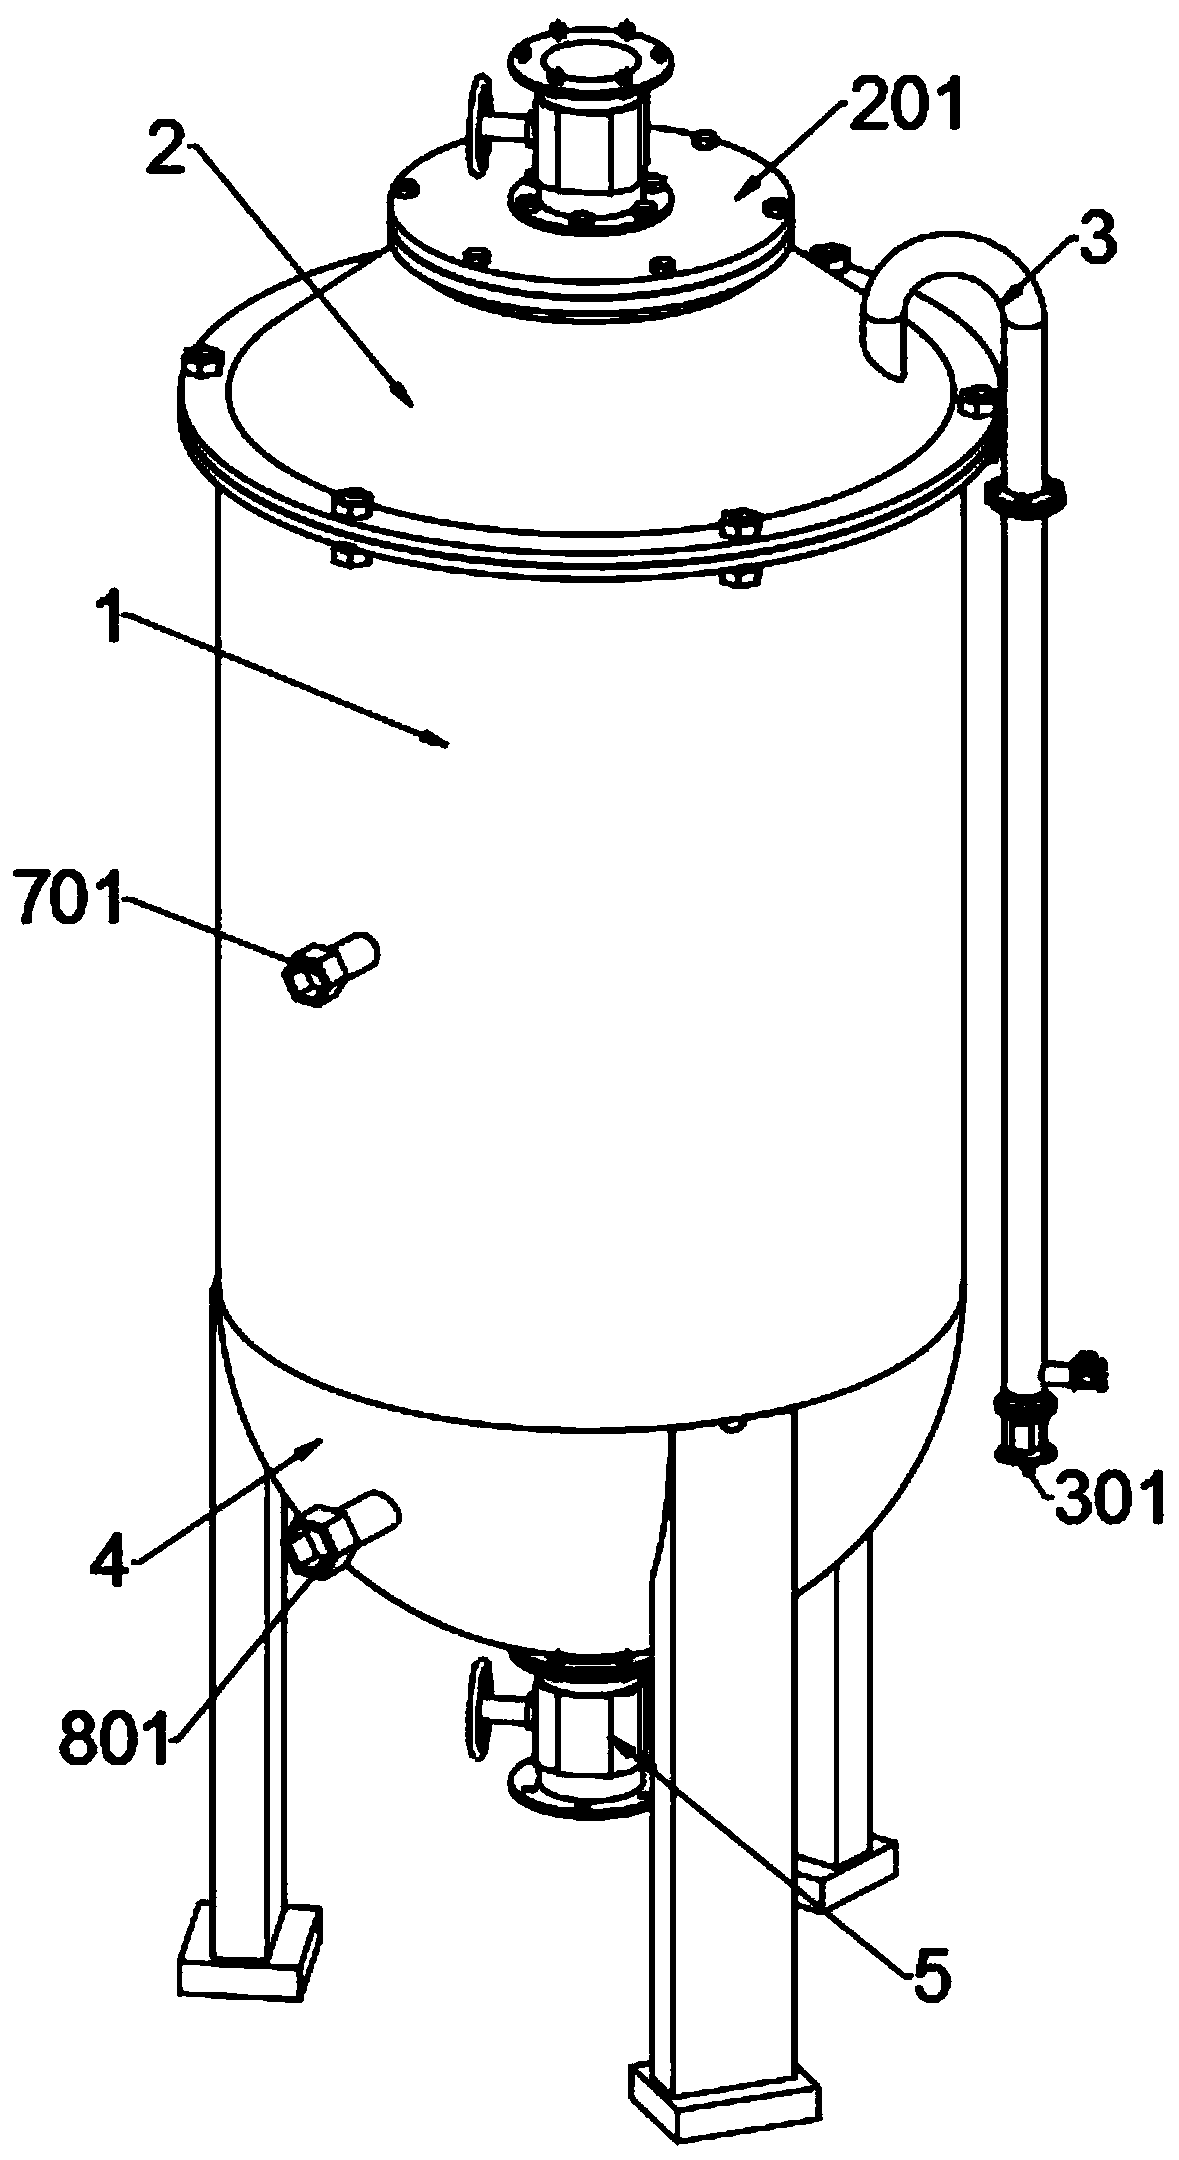 Sand filter tank structure for non-ferrous metal mine acid wastewater treatment system